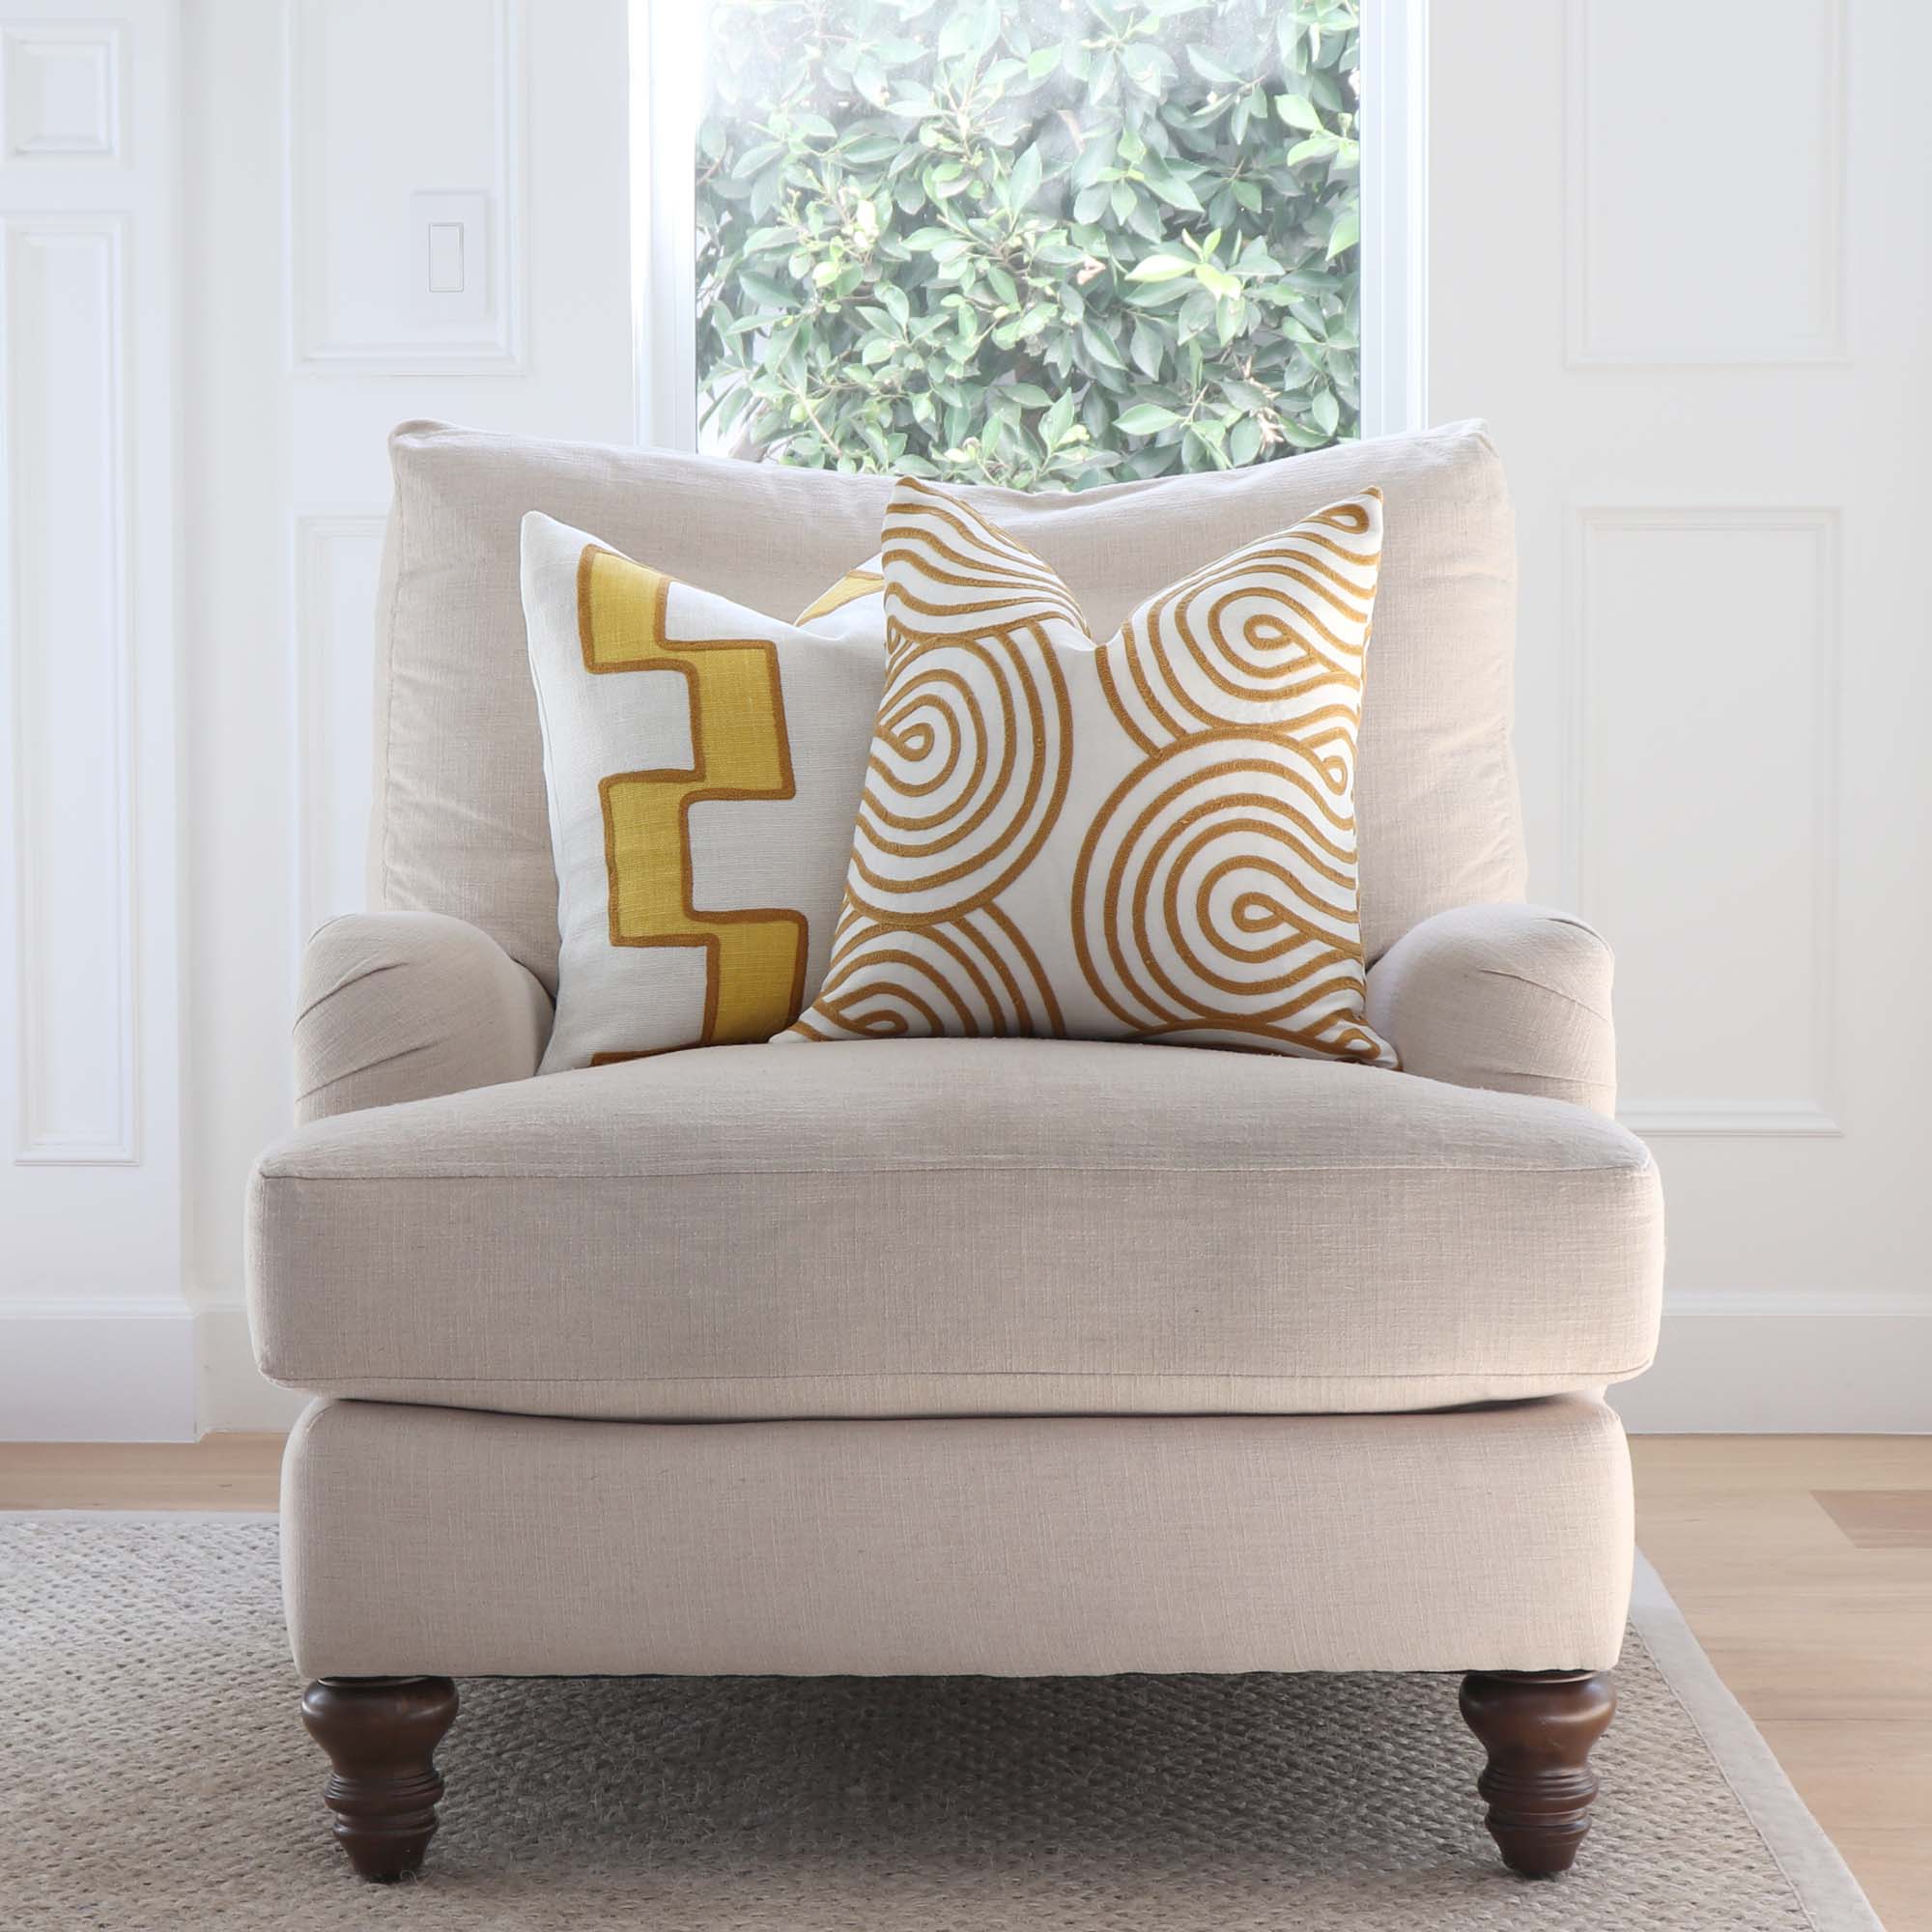 https://www.chloeandolive.com/cdn/shop/products/Schumacher-Giraldi-Embroidery-Gold-Yellow-Luxury-Designer-Throw-Pillow-Cover-in-Living-Room-on-Club-Chair_5000x.jpg?v=1649433449